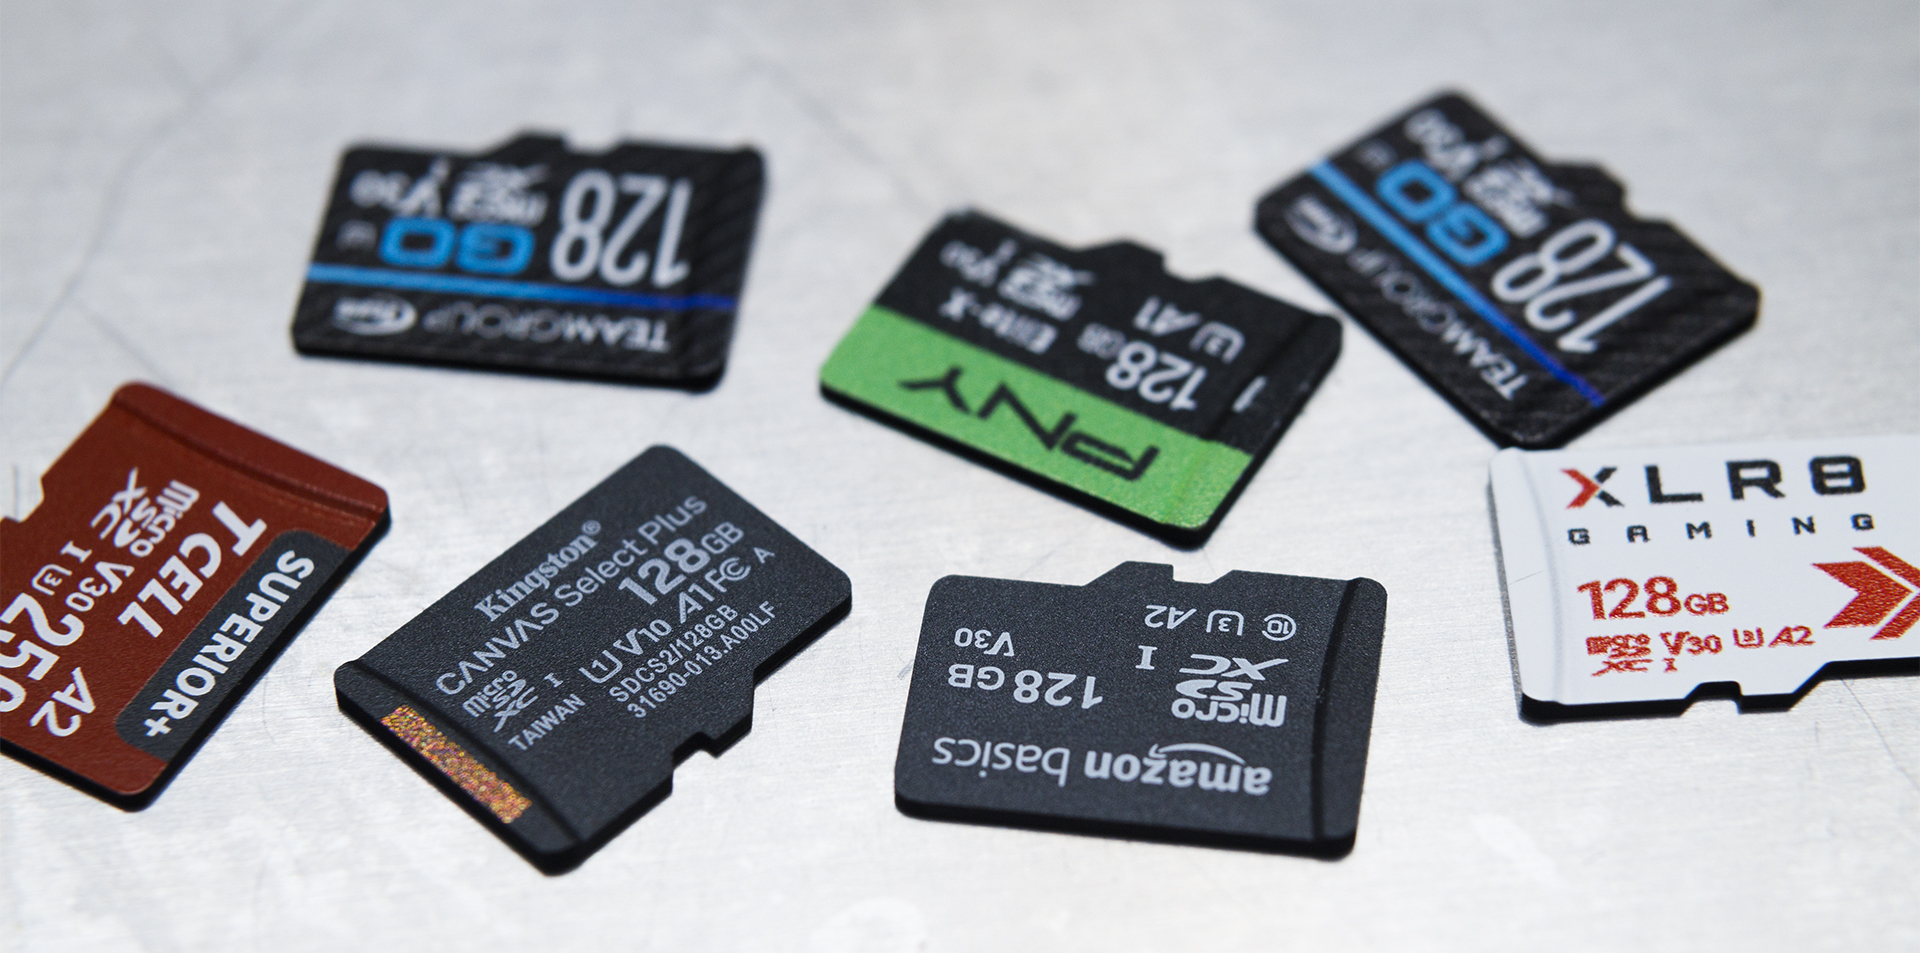 A Guide to Speed Classes for SD and microSD Cards - Kingston Technology